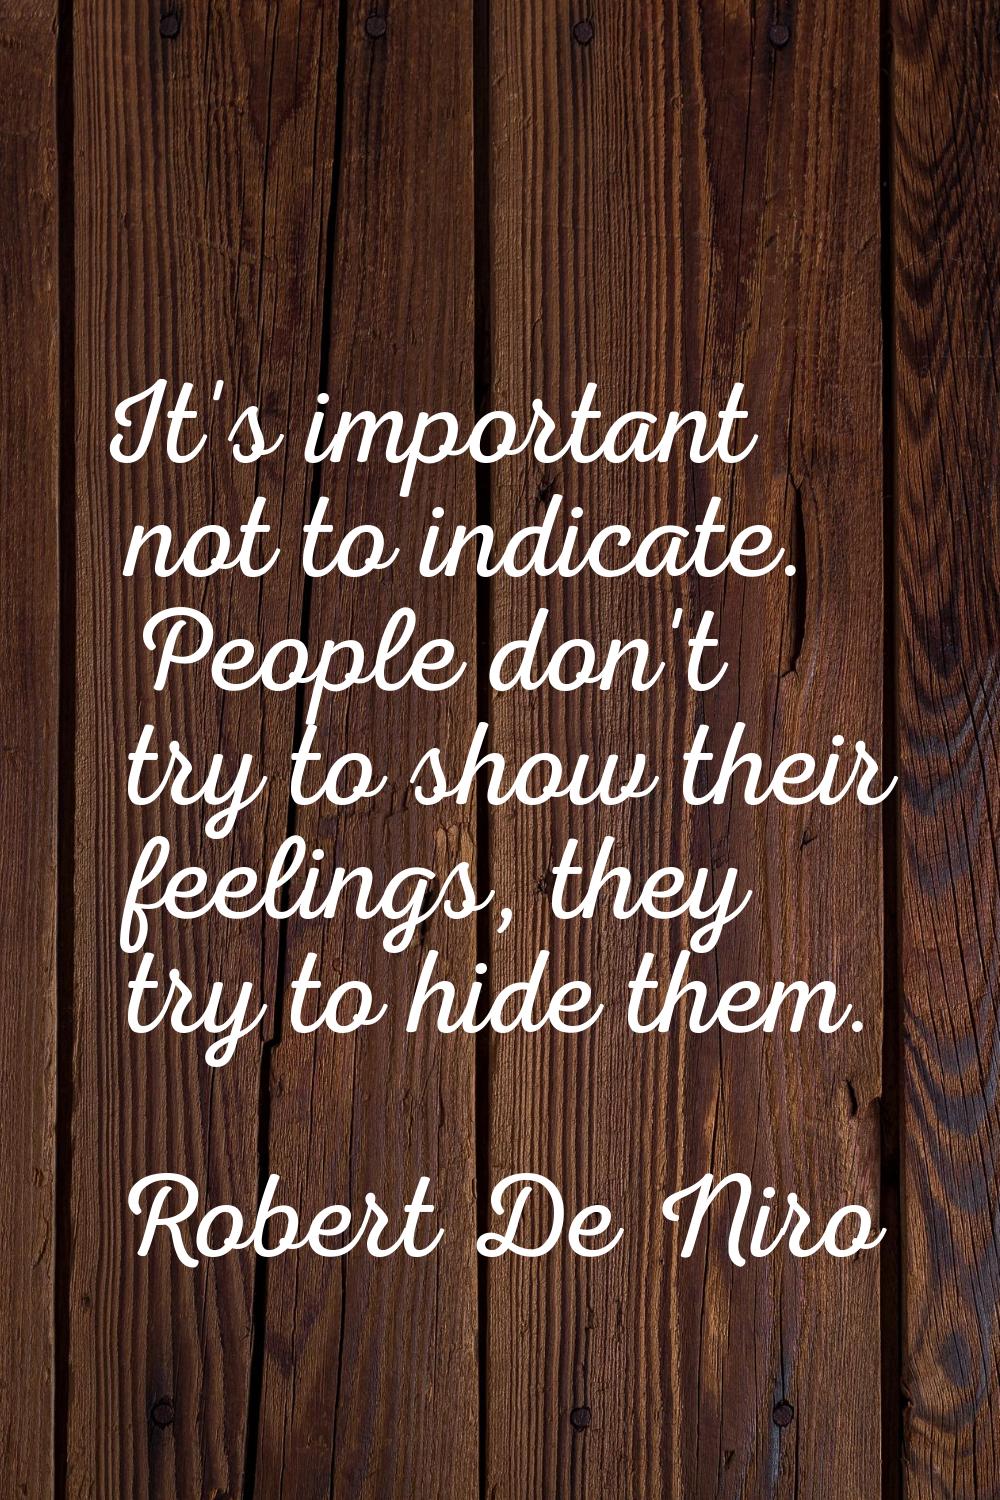 It's important not to indicate. People don't try to show their feelings, they try to hide them.